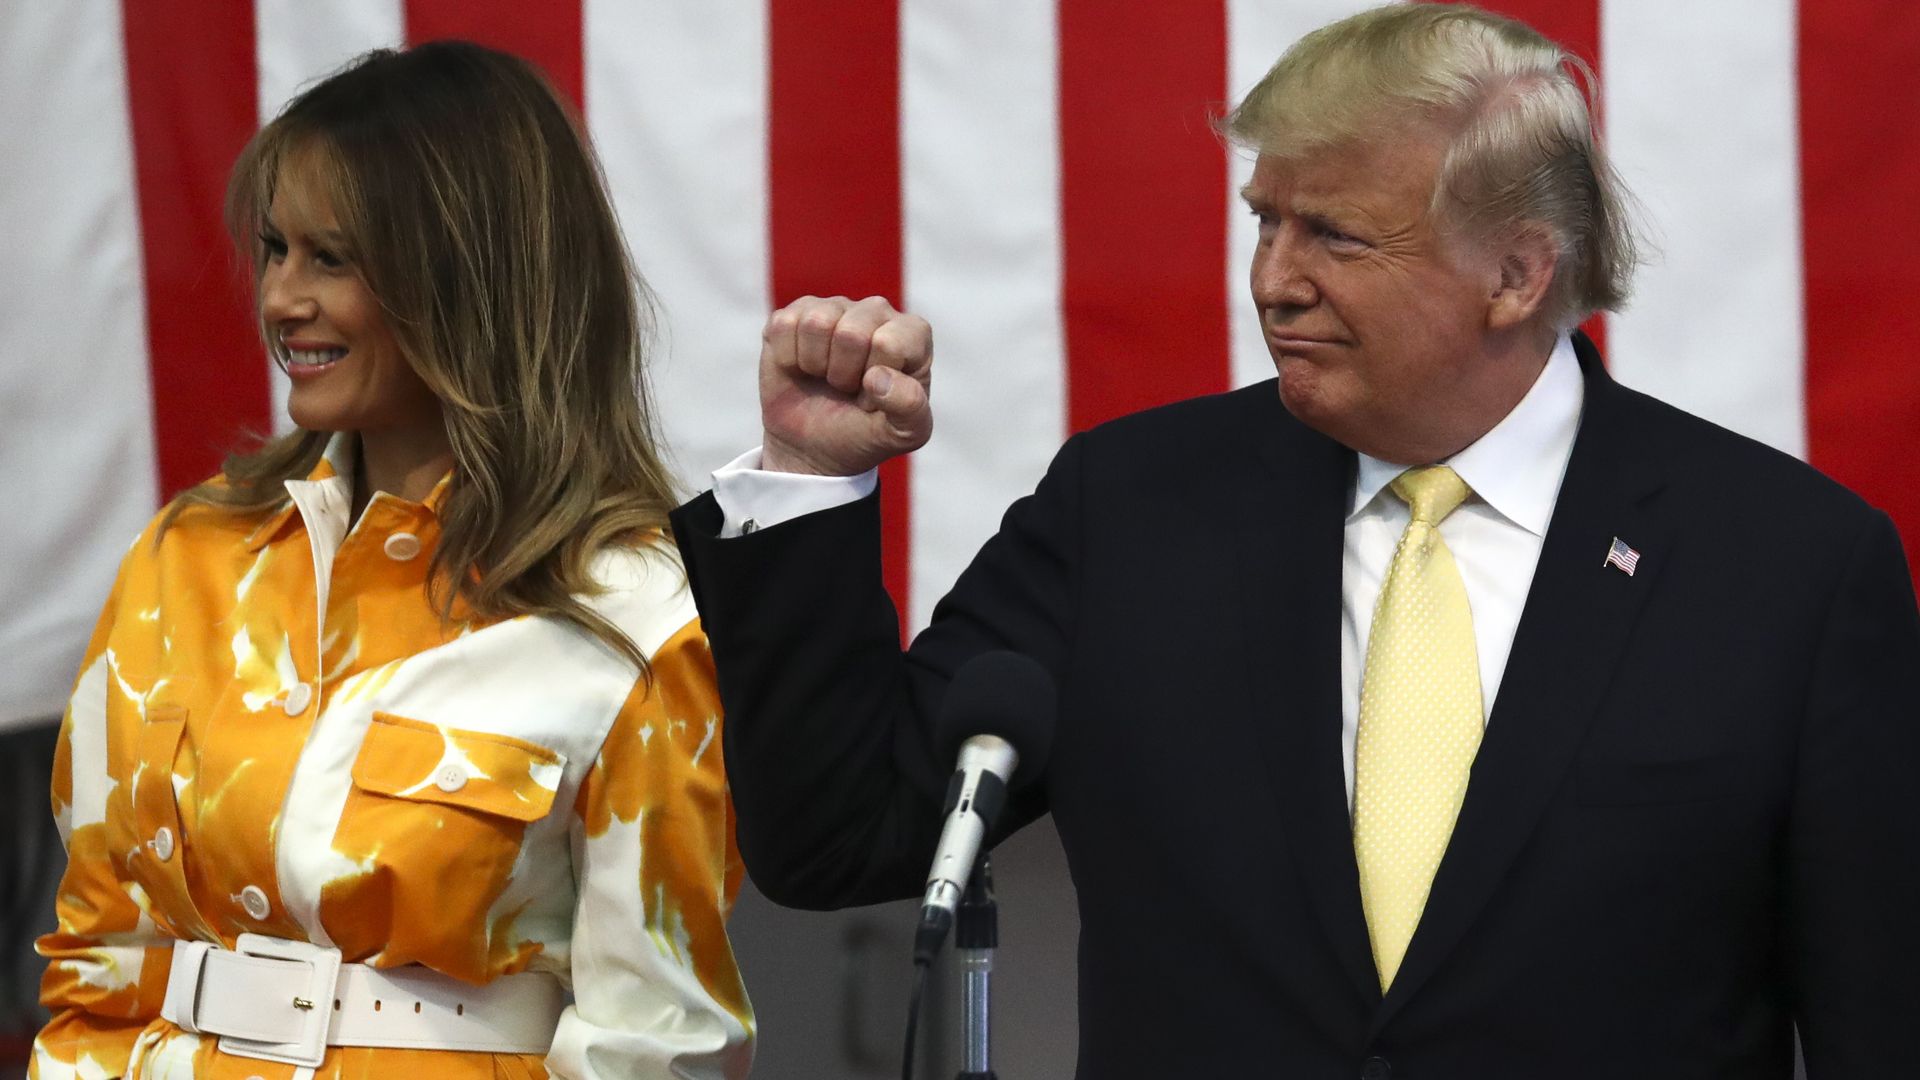 President Trump and Melania during a state visit in Japan